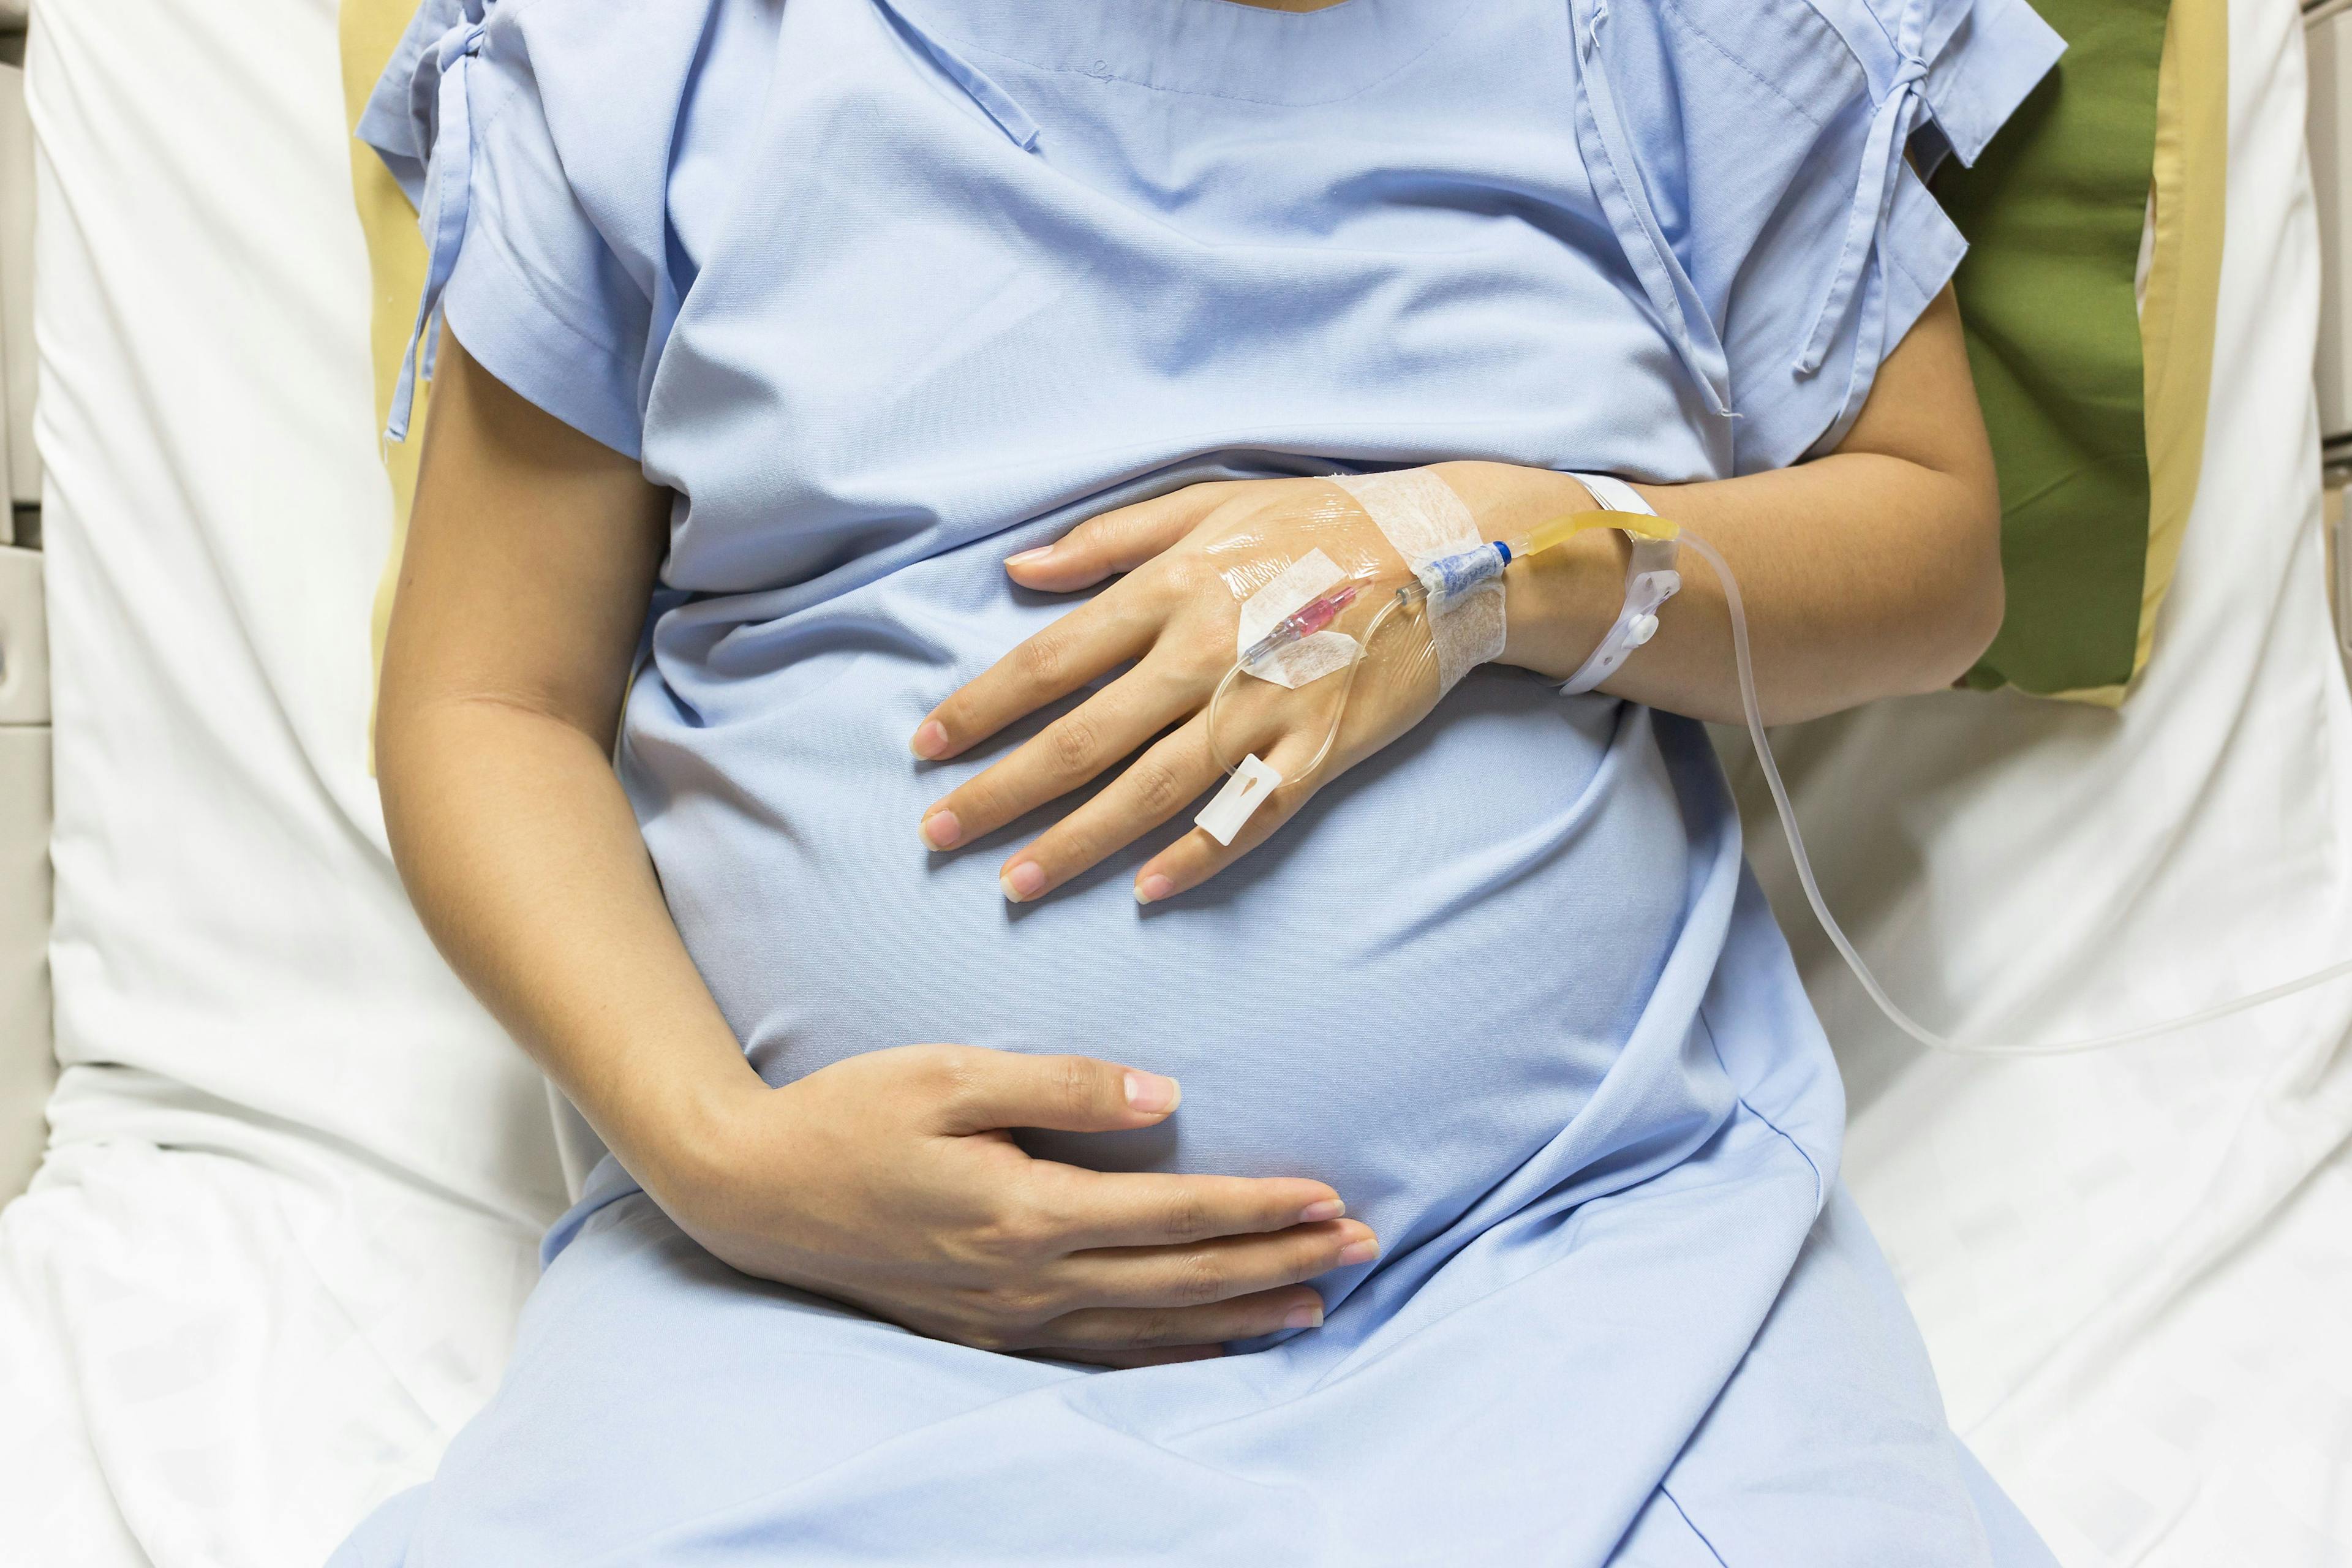 Study: Sleep Apnea During Pregnancy Is Linked to Risk of Hypertension, Metabolic Syndrome